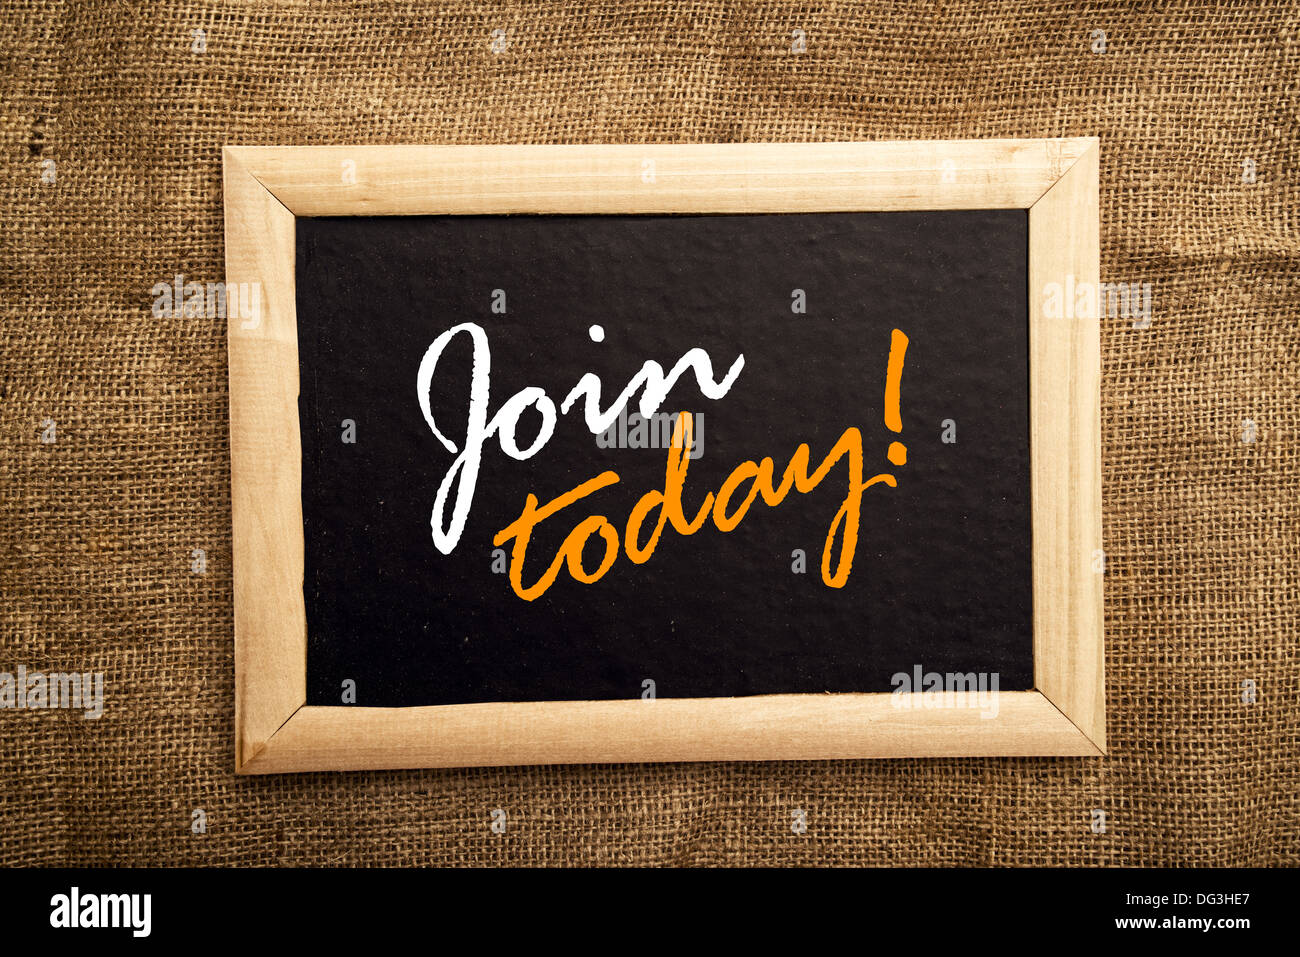 Join today note on black message board Stock Photo